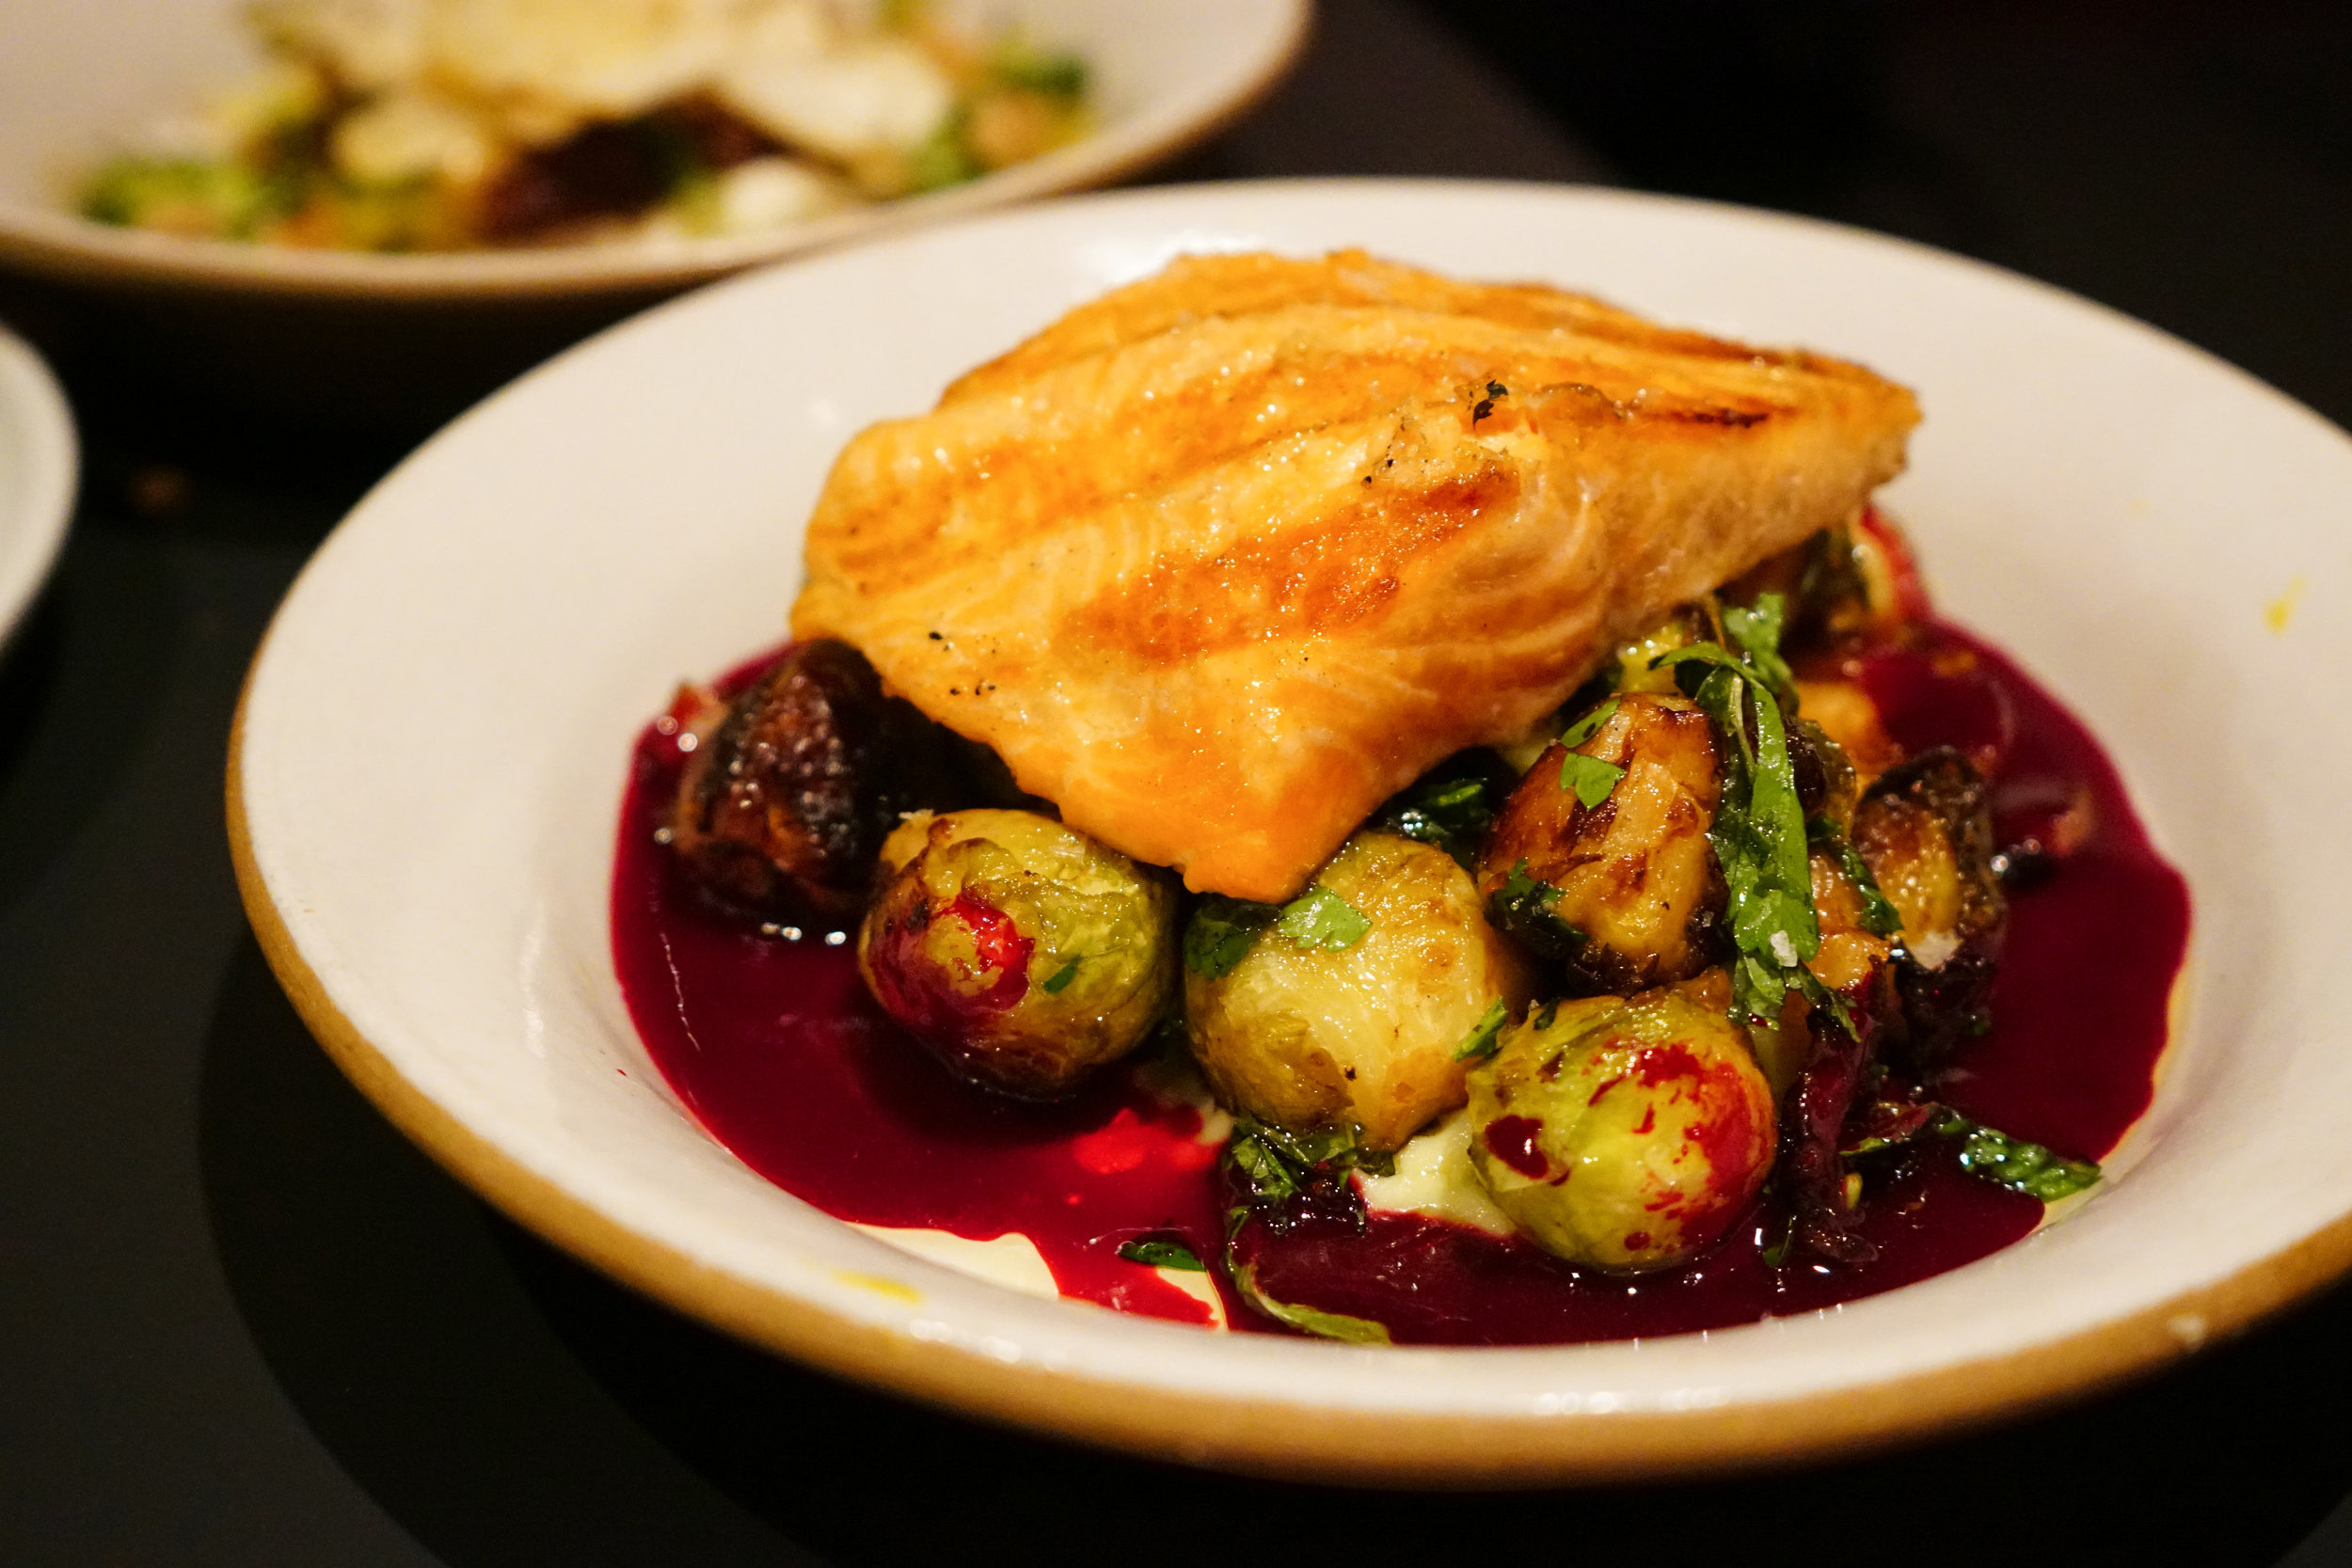 Grilled Arctic Char with Brussels Sprouts at Loring Place in New York City